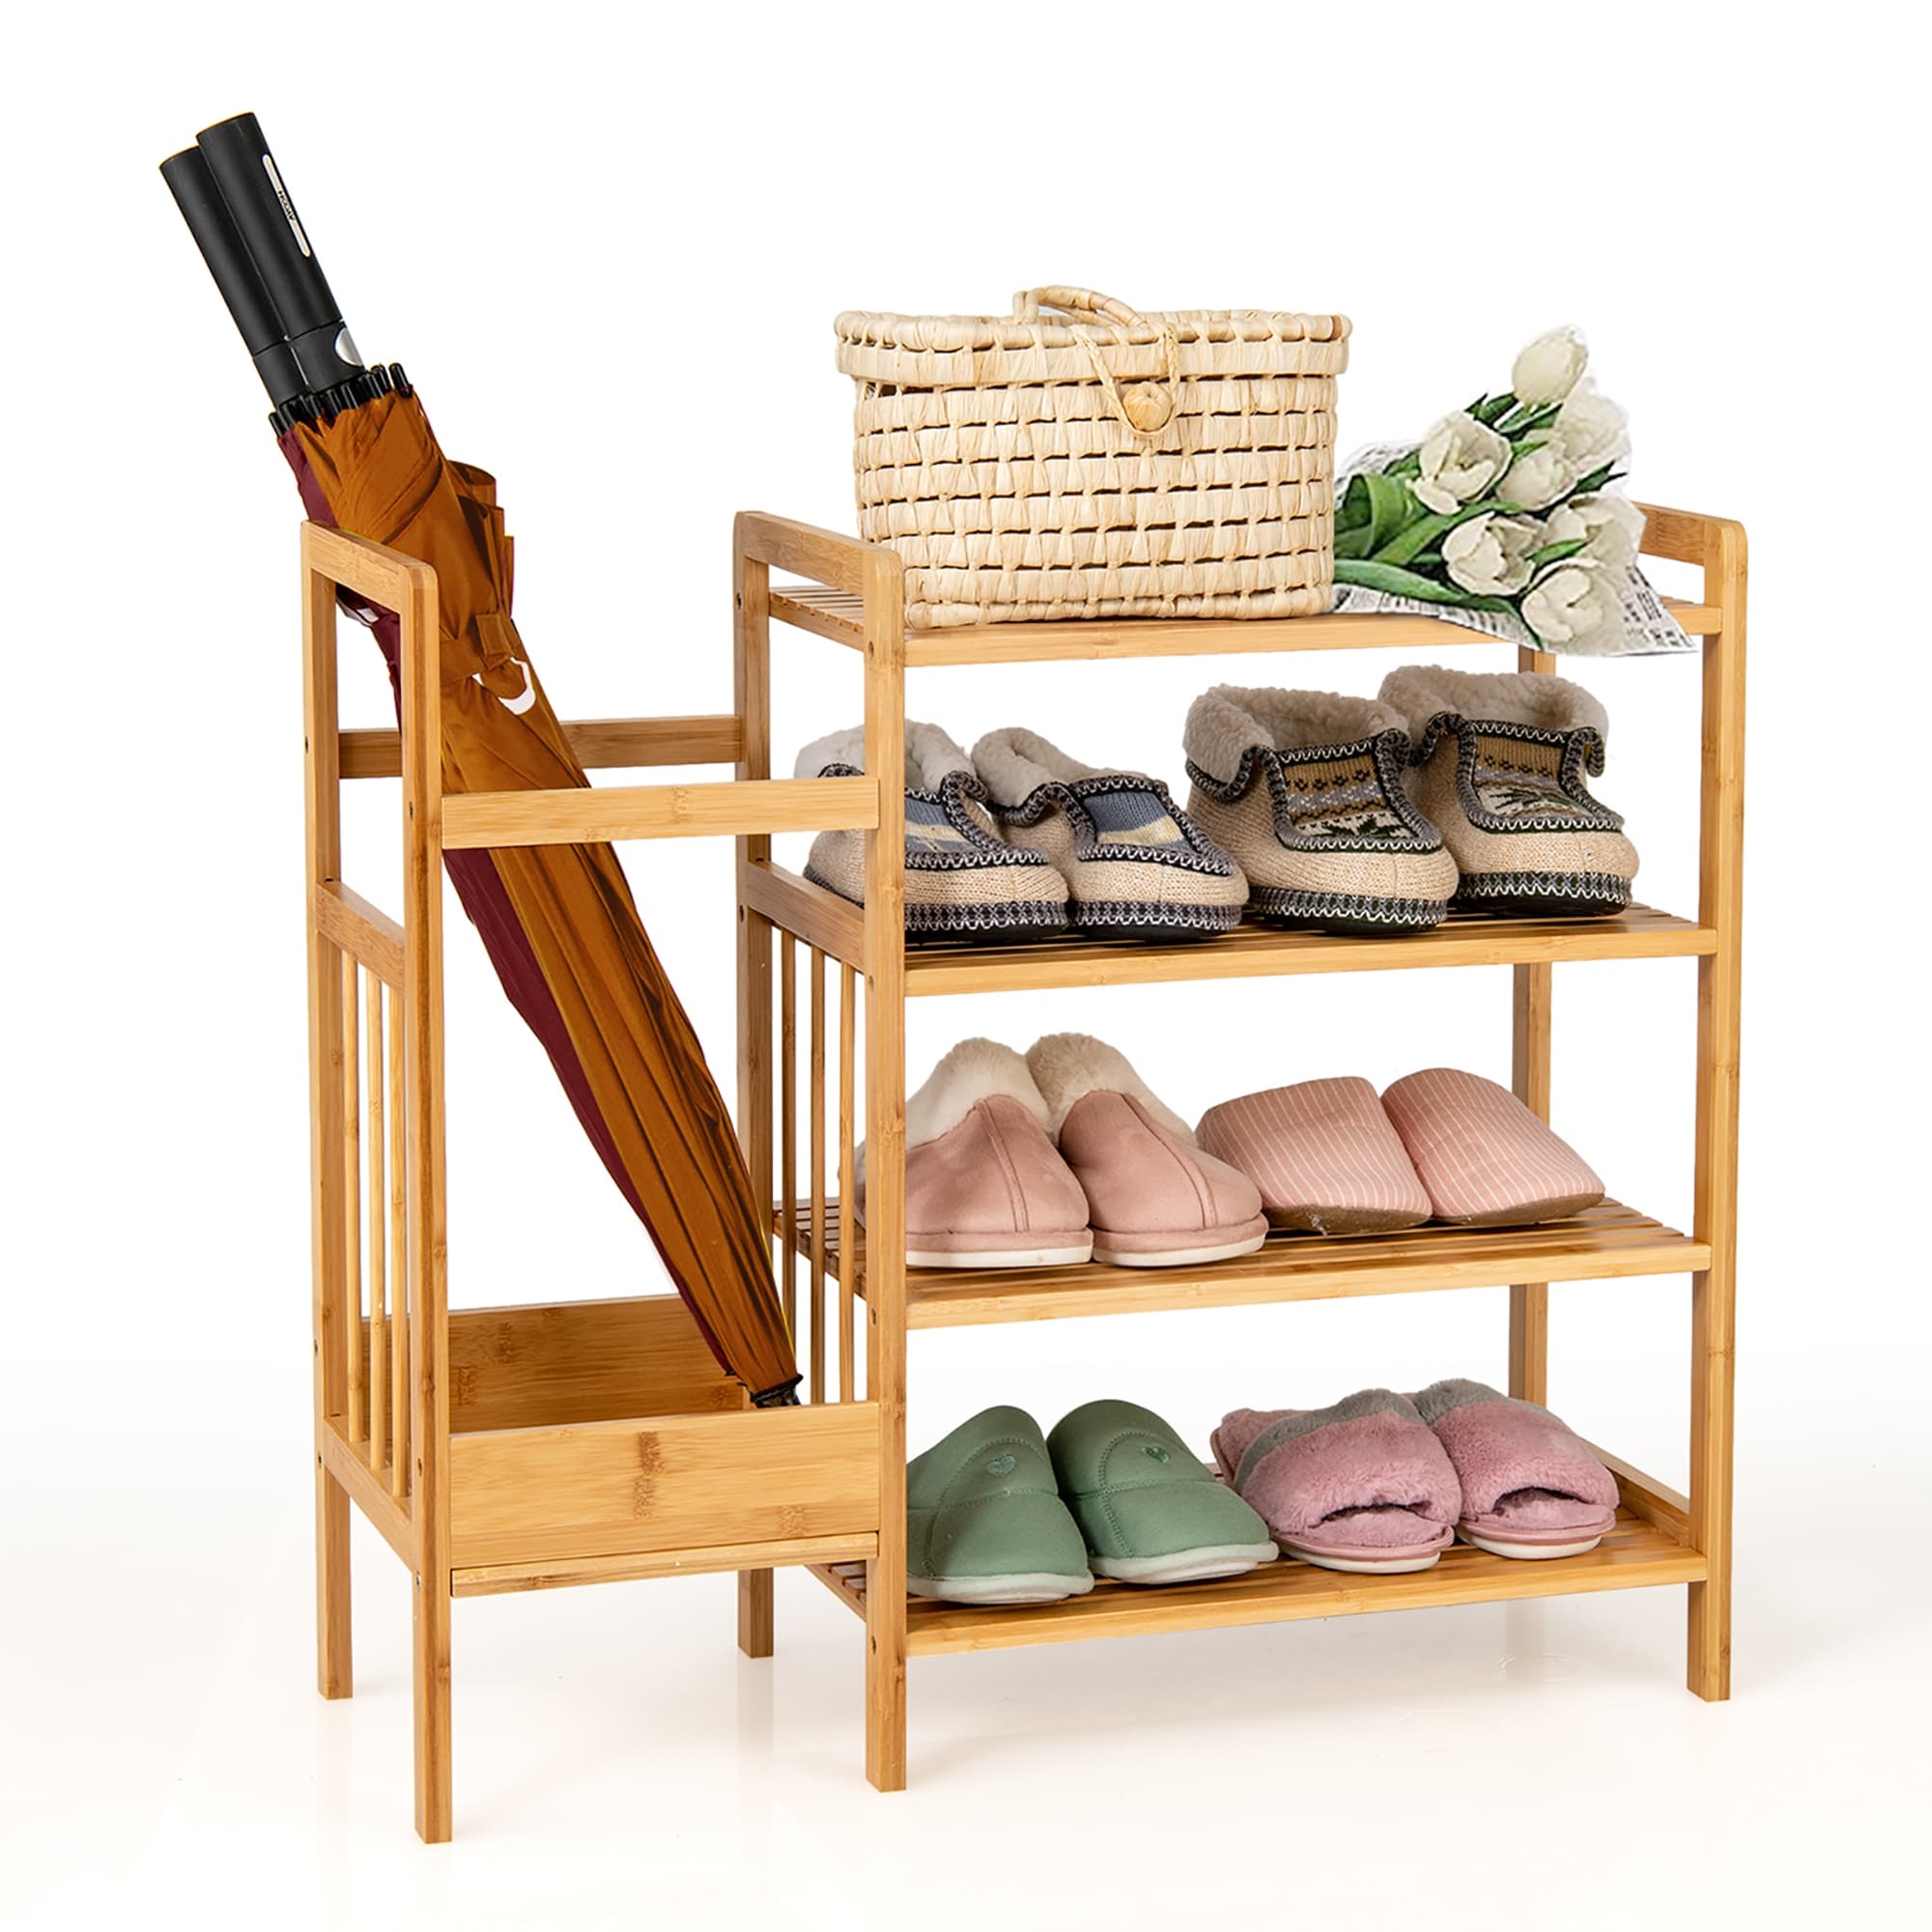 https://ak1.ostkcdn.com/images/products/is/images/direct/60c02e7725f2257240d3e43aa422650e472eac42/Costway-4-Tier-Bamboo-Shoe-Rack-Entryway-Organizer-w-Umbrella-Holder-%26.jpg